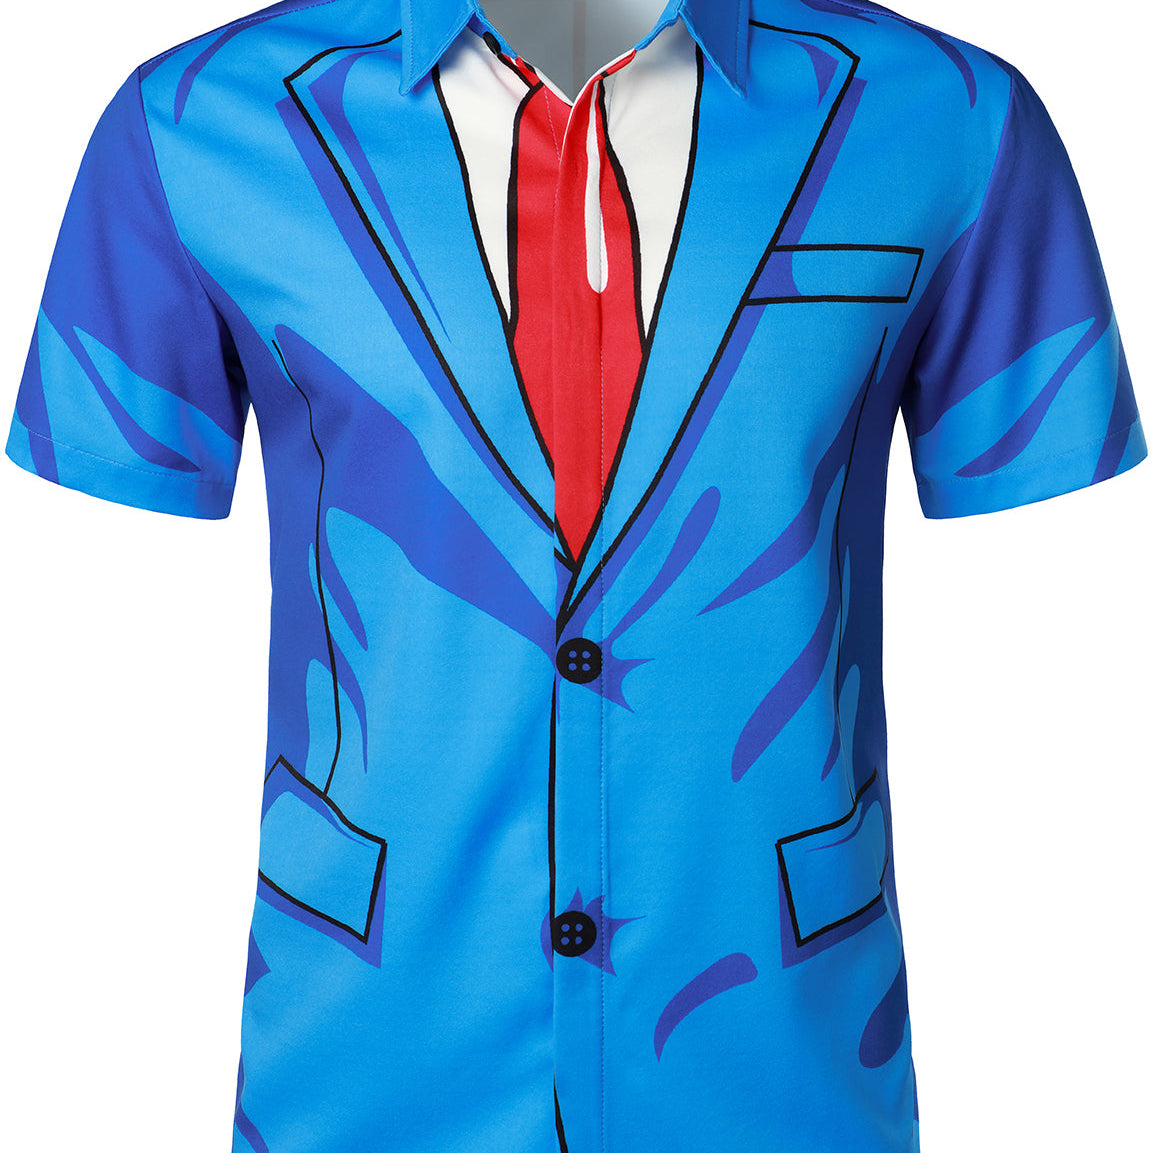 Men's Blue Suit Party Themed Costume Cool Halloween Short Sleeve Shirt